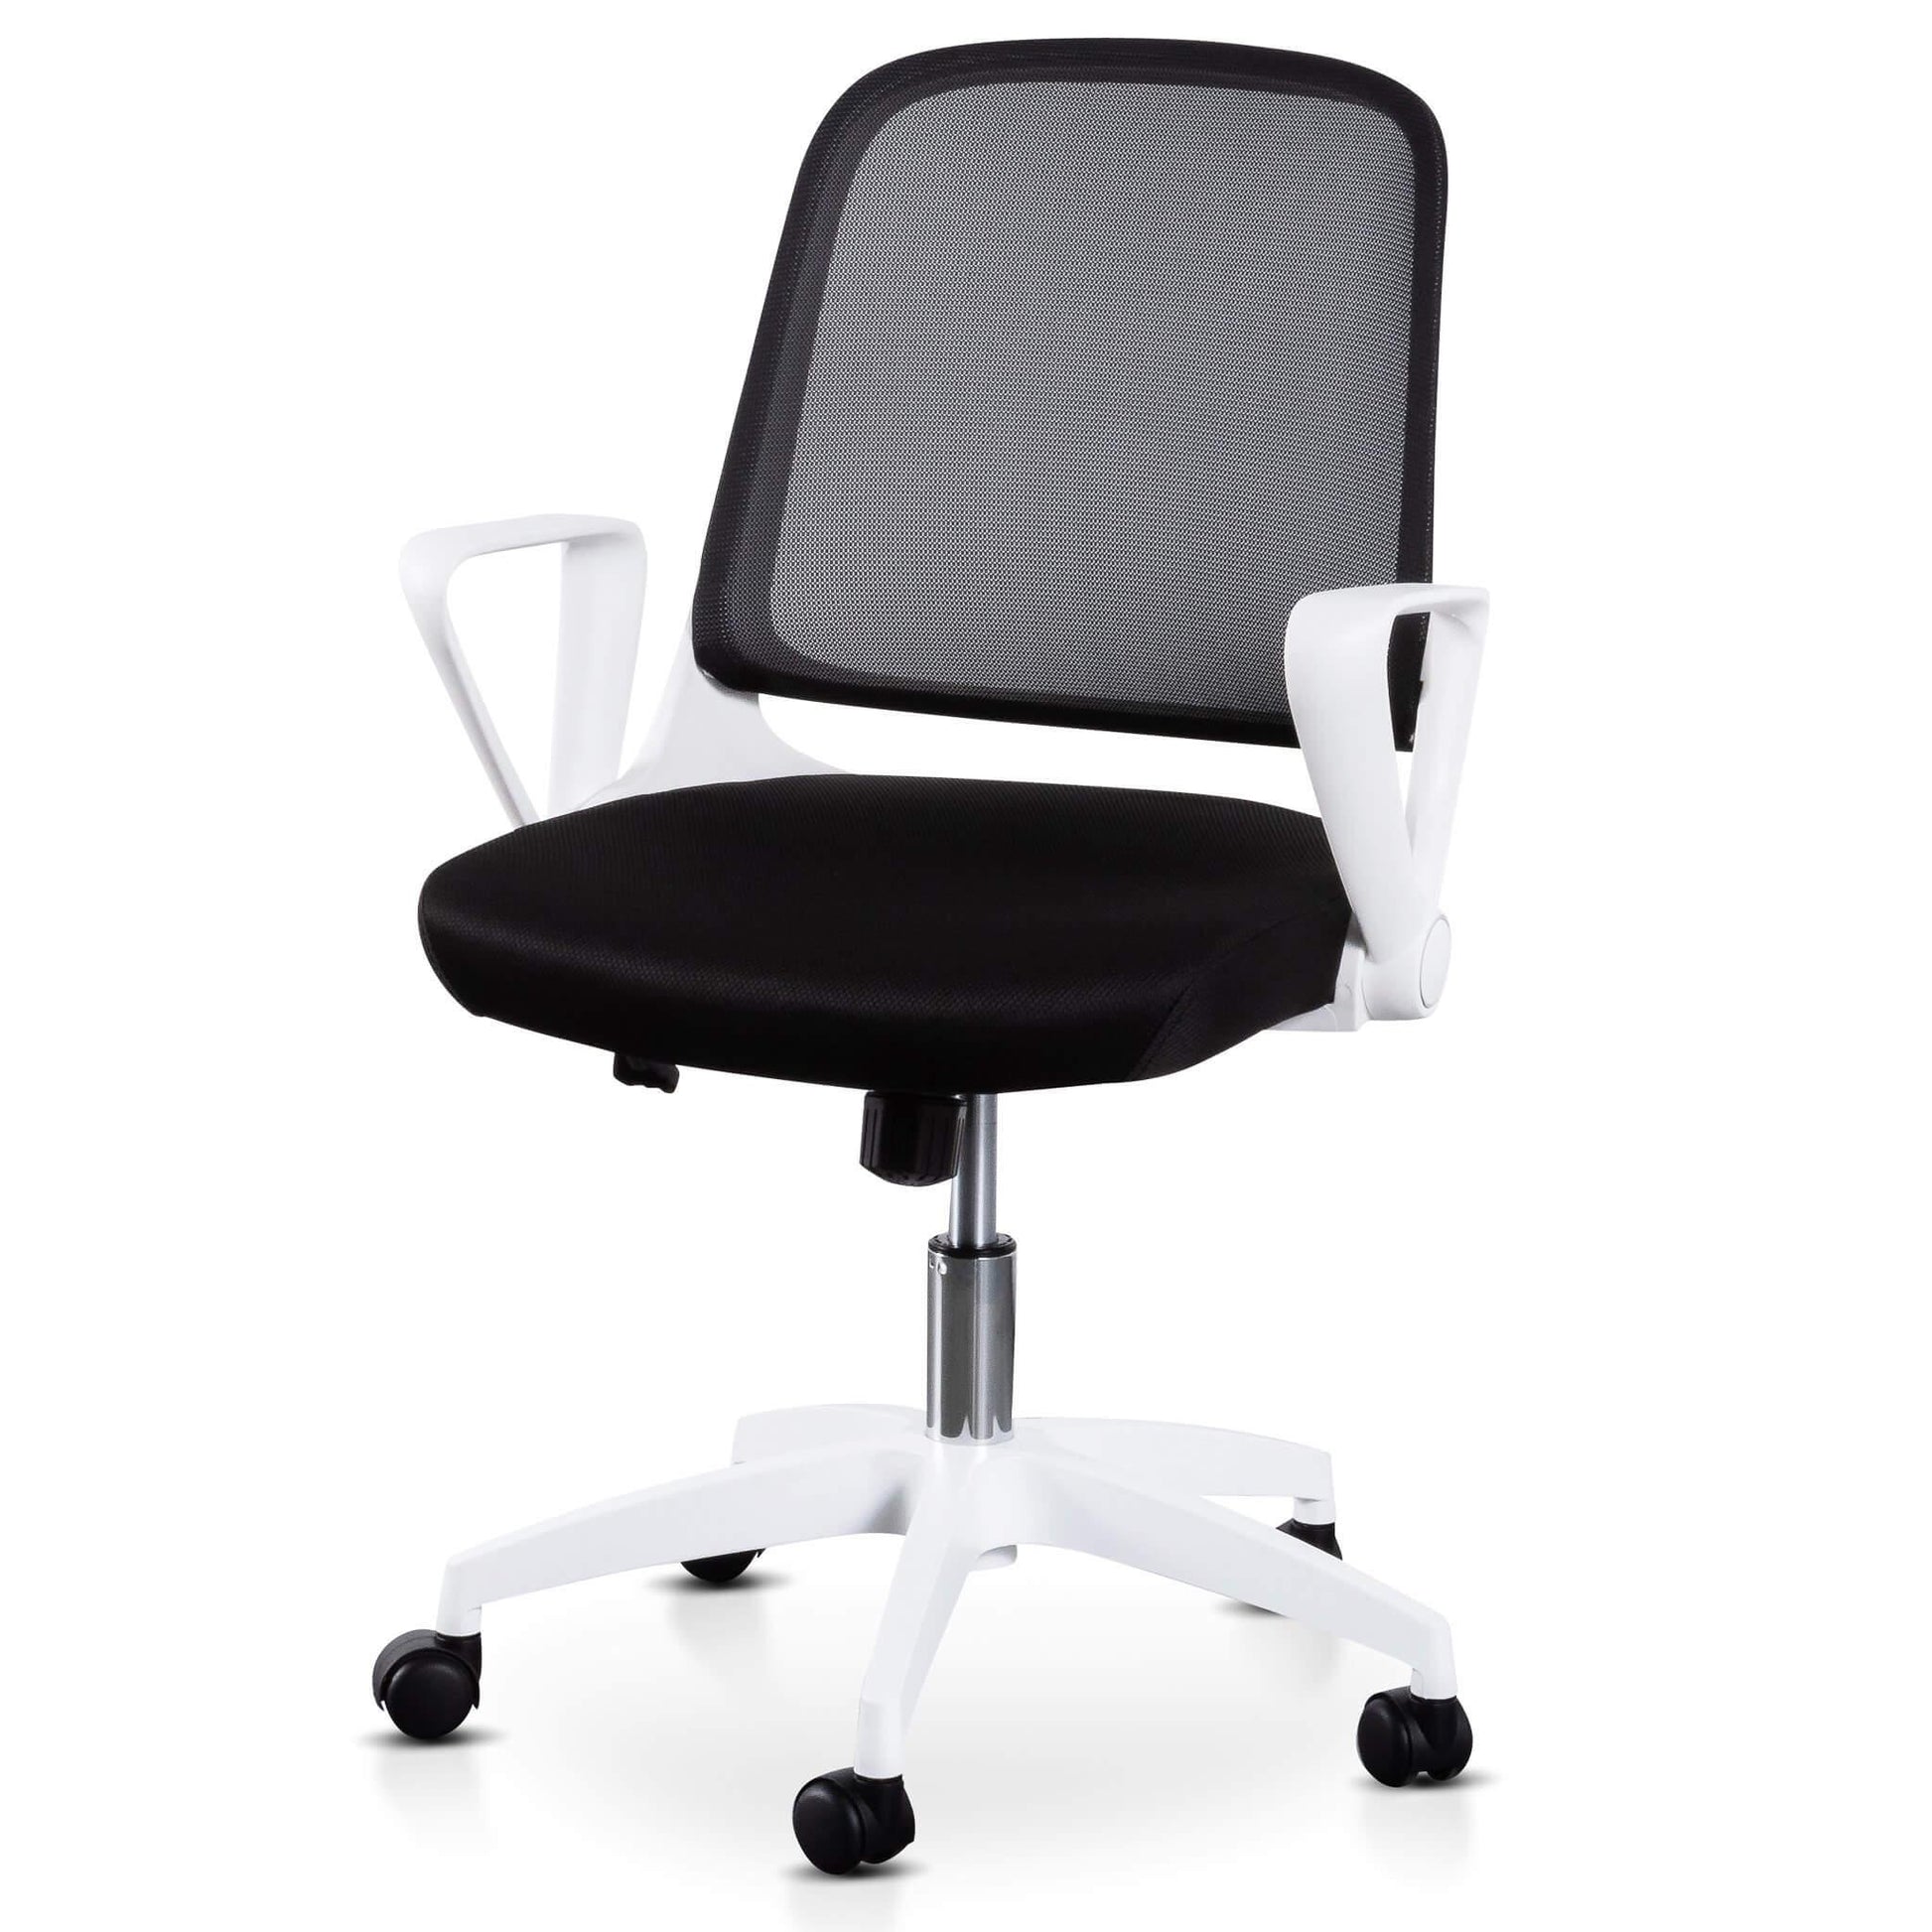 Calibre Black Office Chair - White Arm and Base OC6190-LF - Office/Gaming ChairsOC6190-LF 1